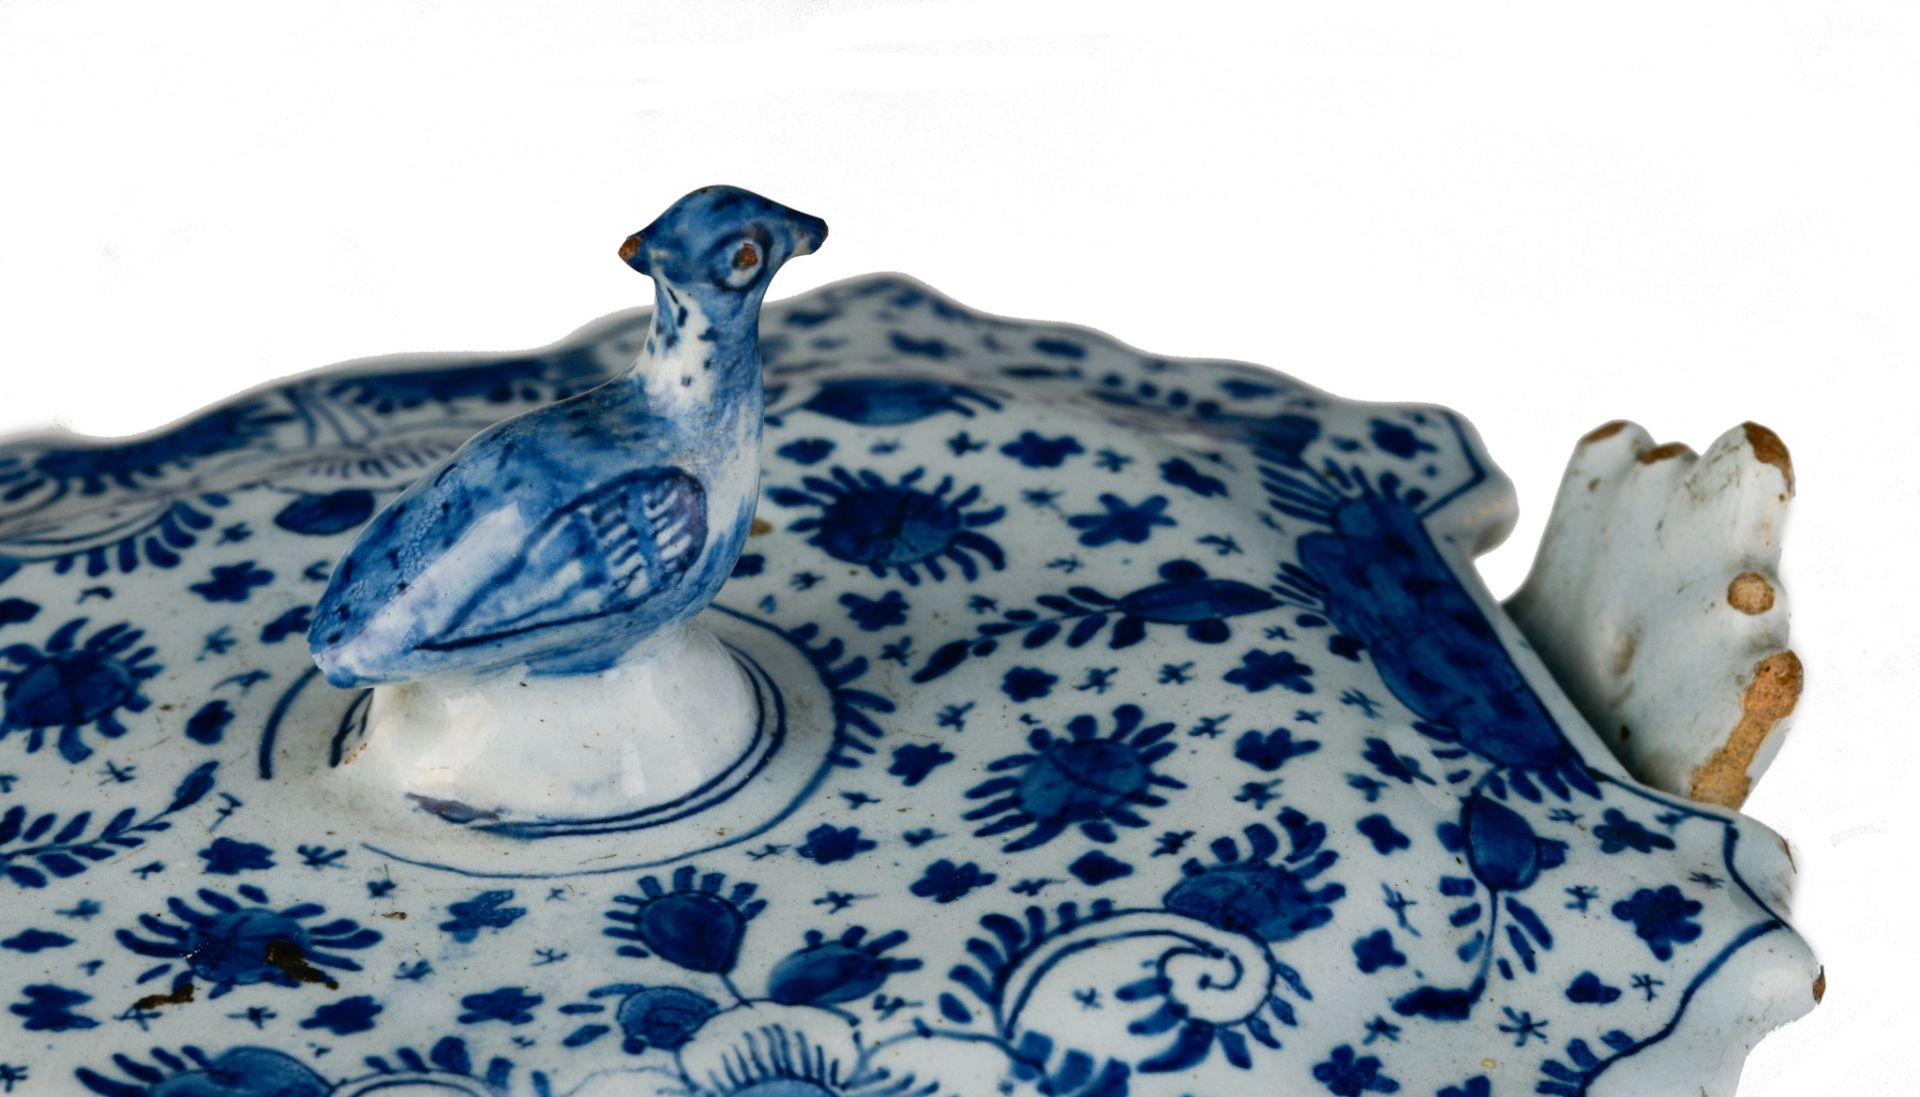 (BIDDING ONLY ON CARLOBONTE.BE) A fine Delft blue and white butter tub, marked 'De Lampetkan', 18thC - Image 12 of 14